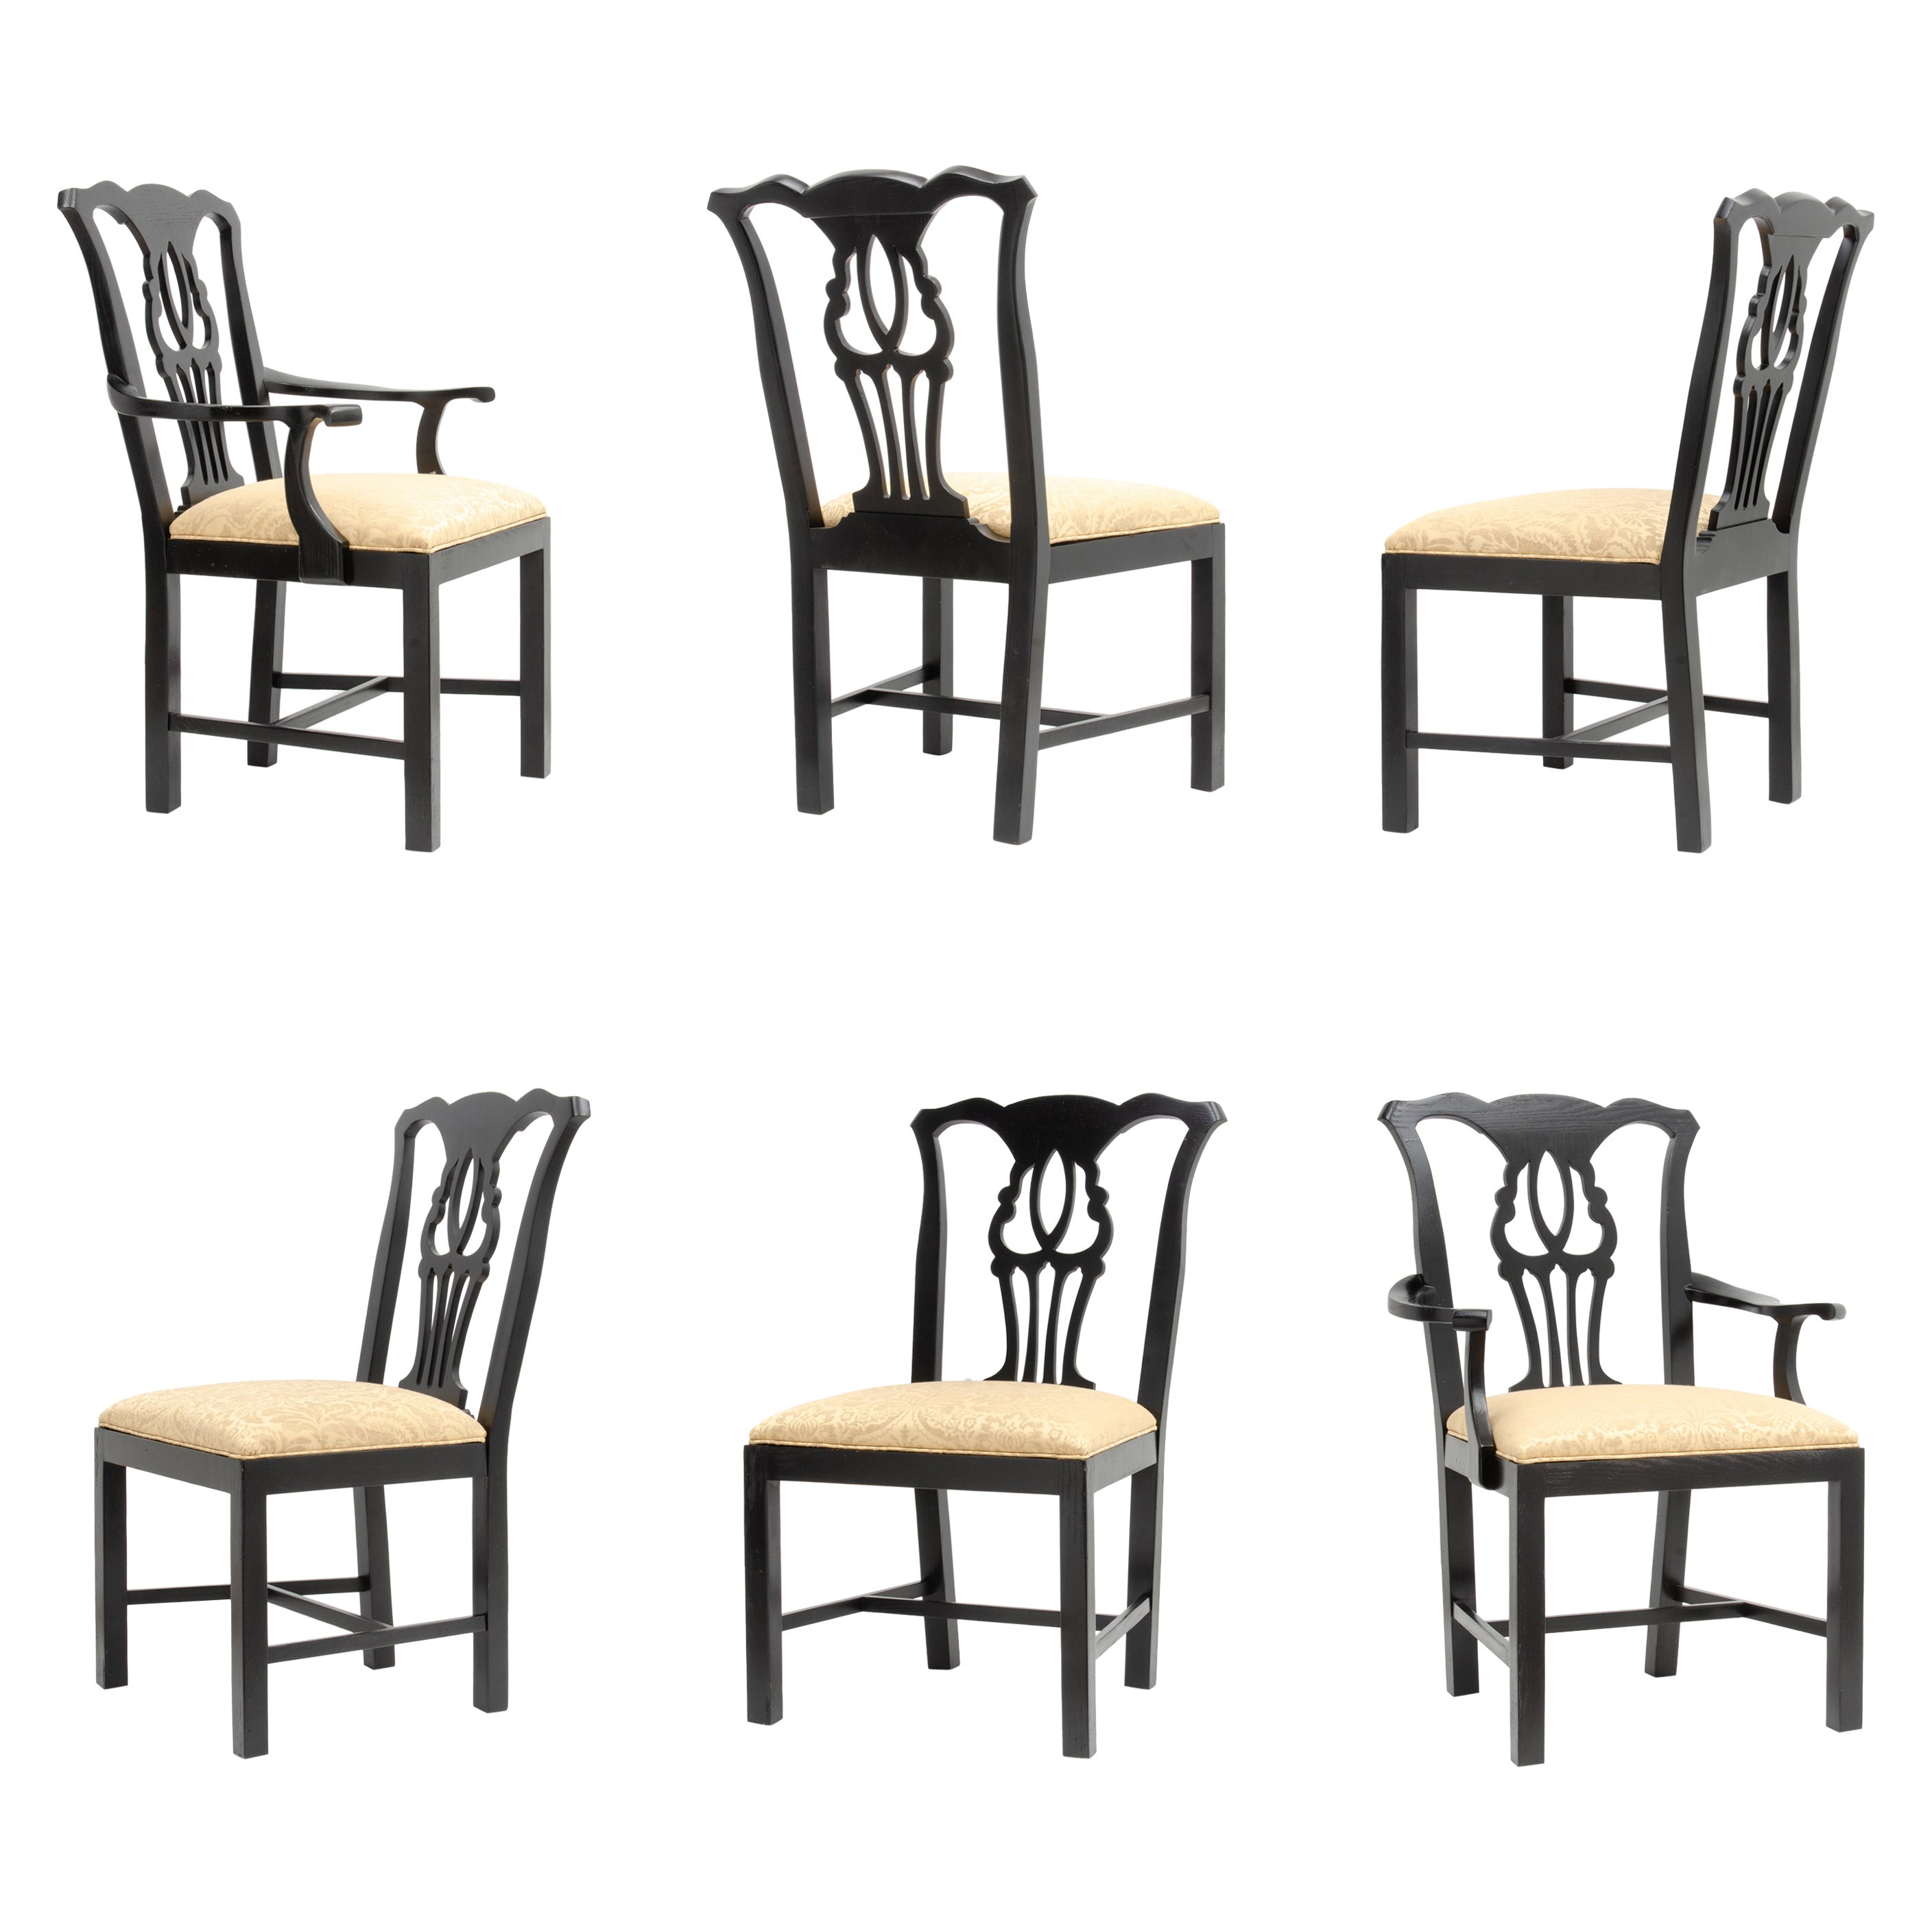 Black Lacquer John Stuart Chippendale Dining Chairs Mid Century - a Set of 6